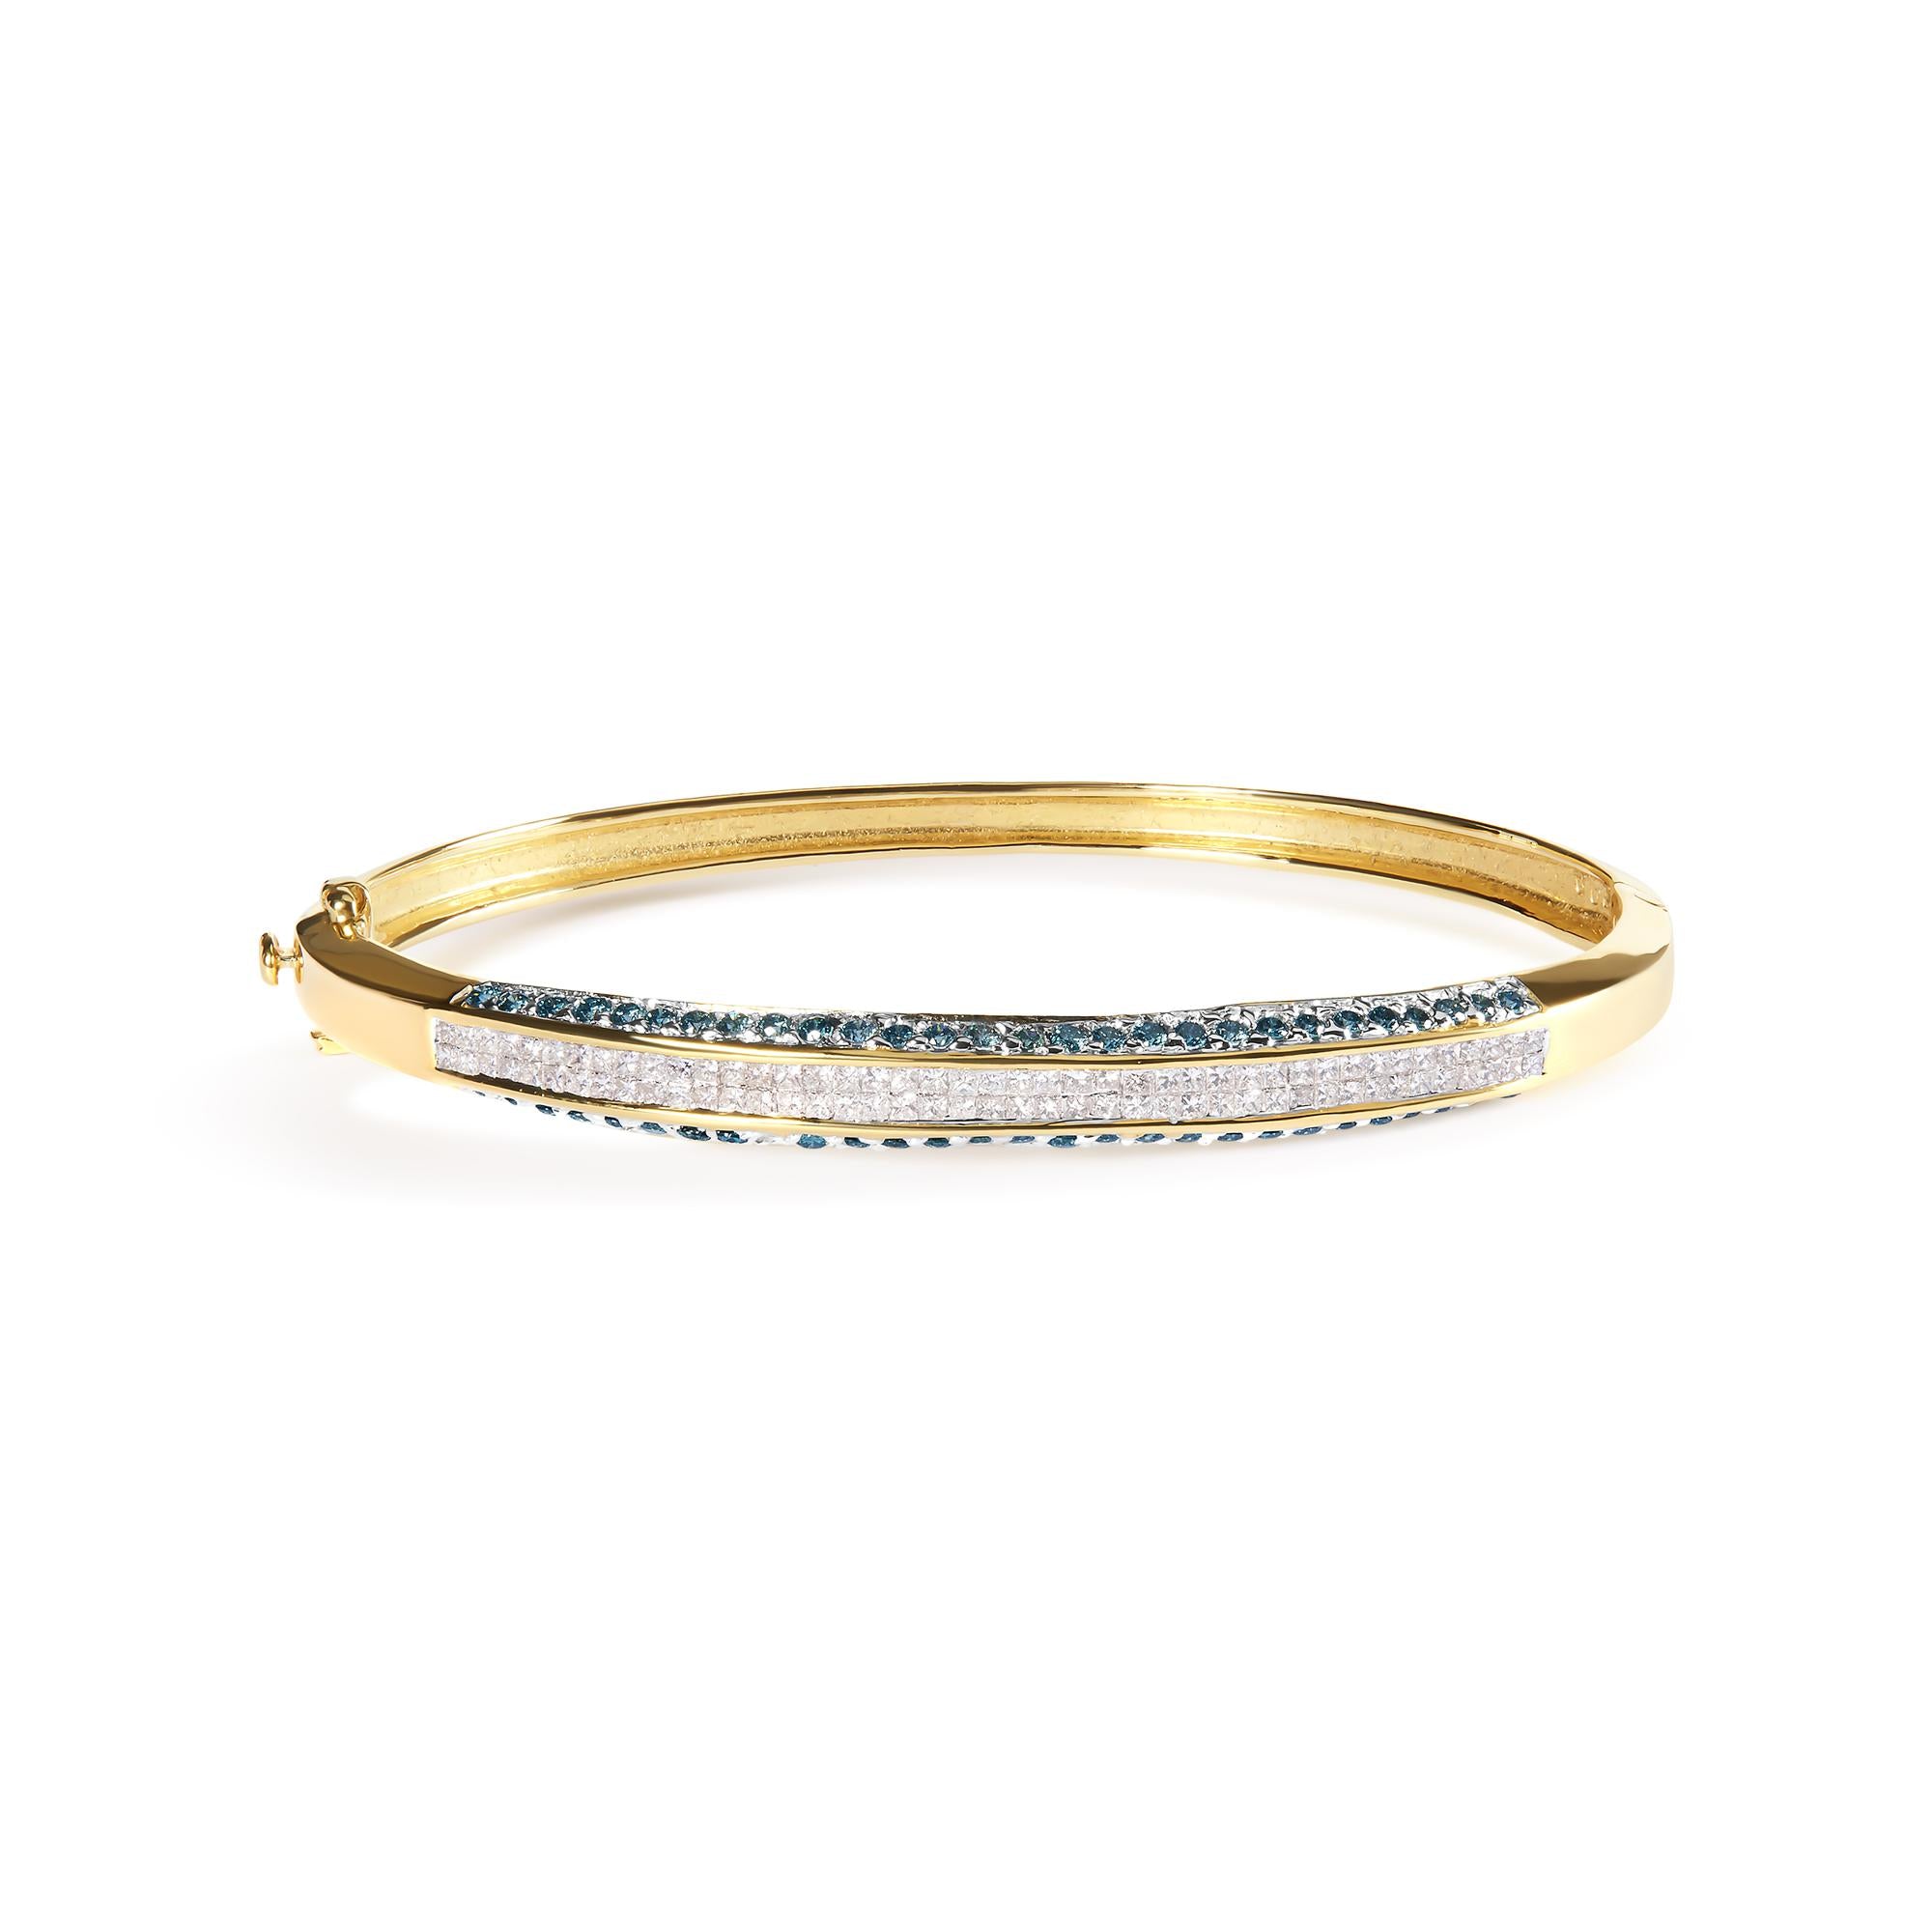 ''14K Yellow Gold 2.0 Cttw Treated Blue and White Diamond BANGLE Bracelet (H-I Color, SI2-I1 Clarity)